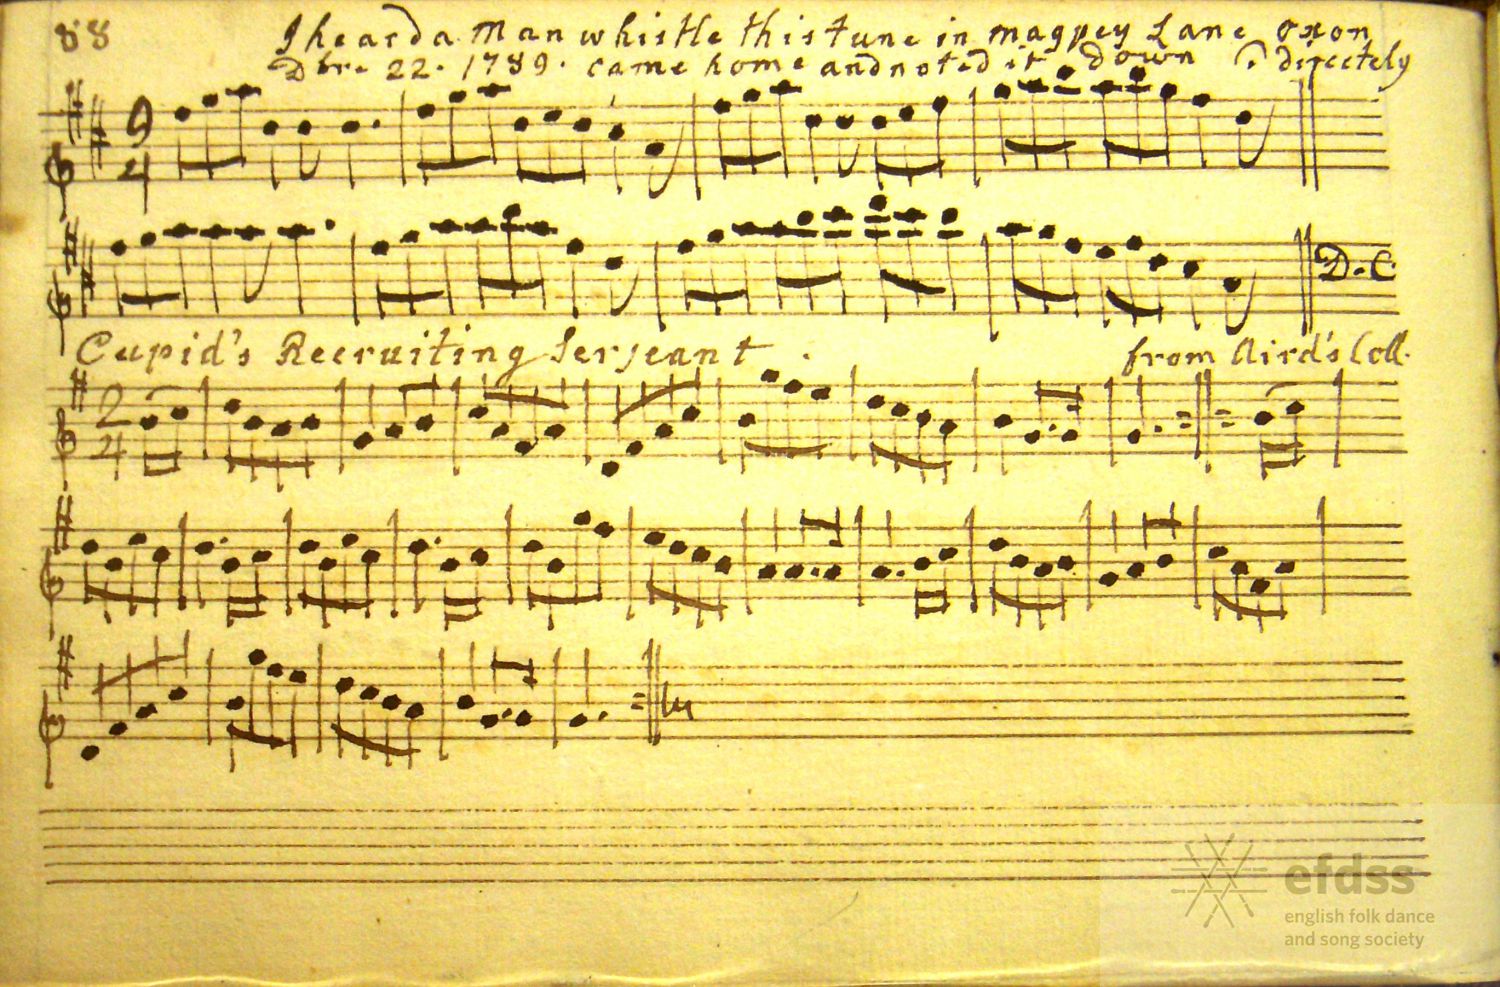 Facsimile of a page from John Baptist Malchair's Third Collection of Tunes, showing the tune we know as 'Magpie Lane', and 'Cupid's Recruiting Sergeant'. From the Vaughan Williams Memorial Library.